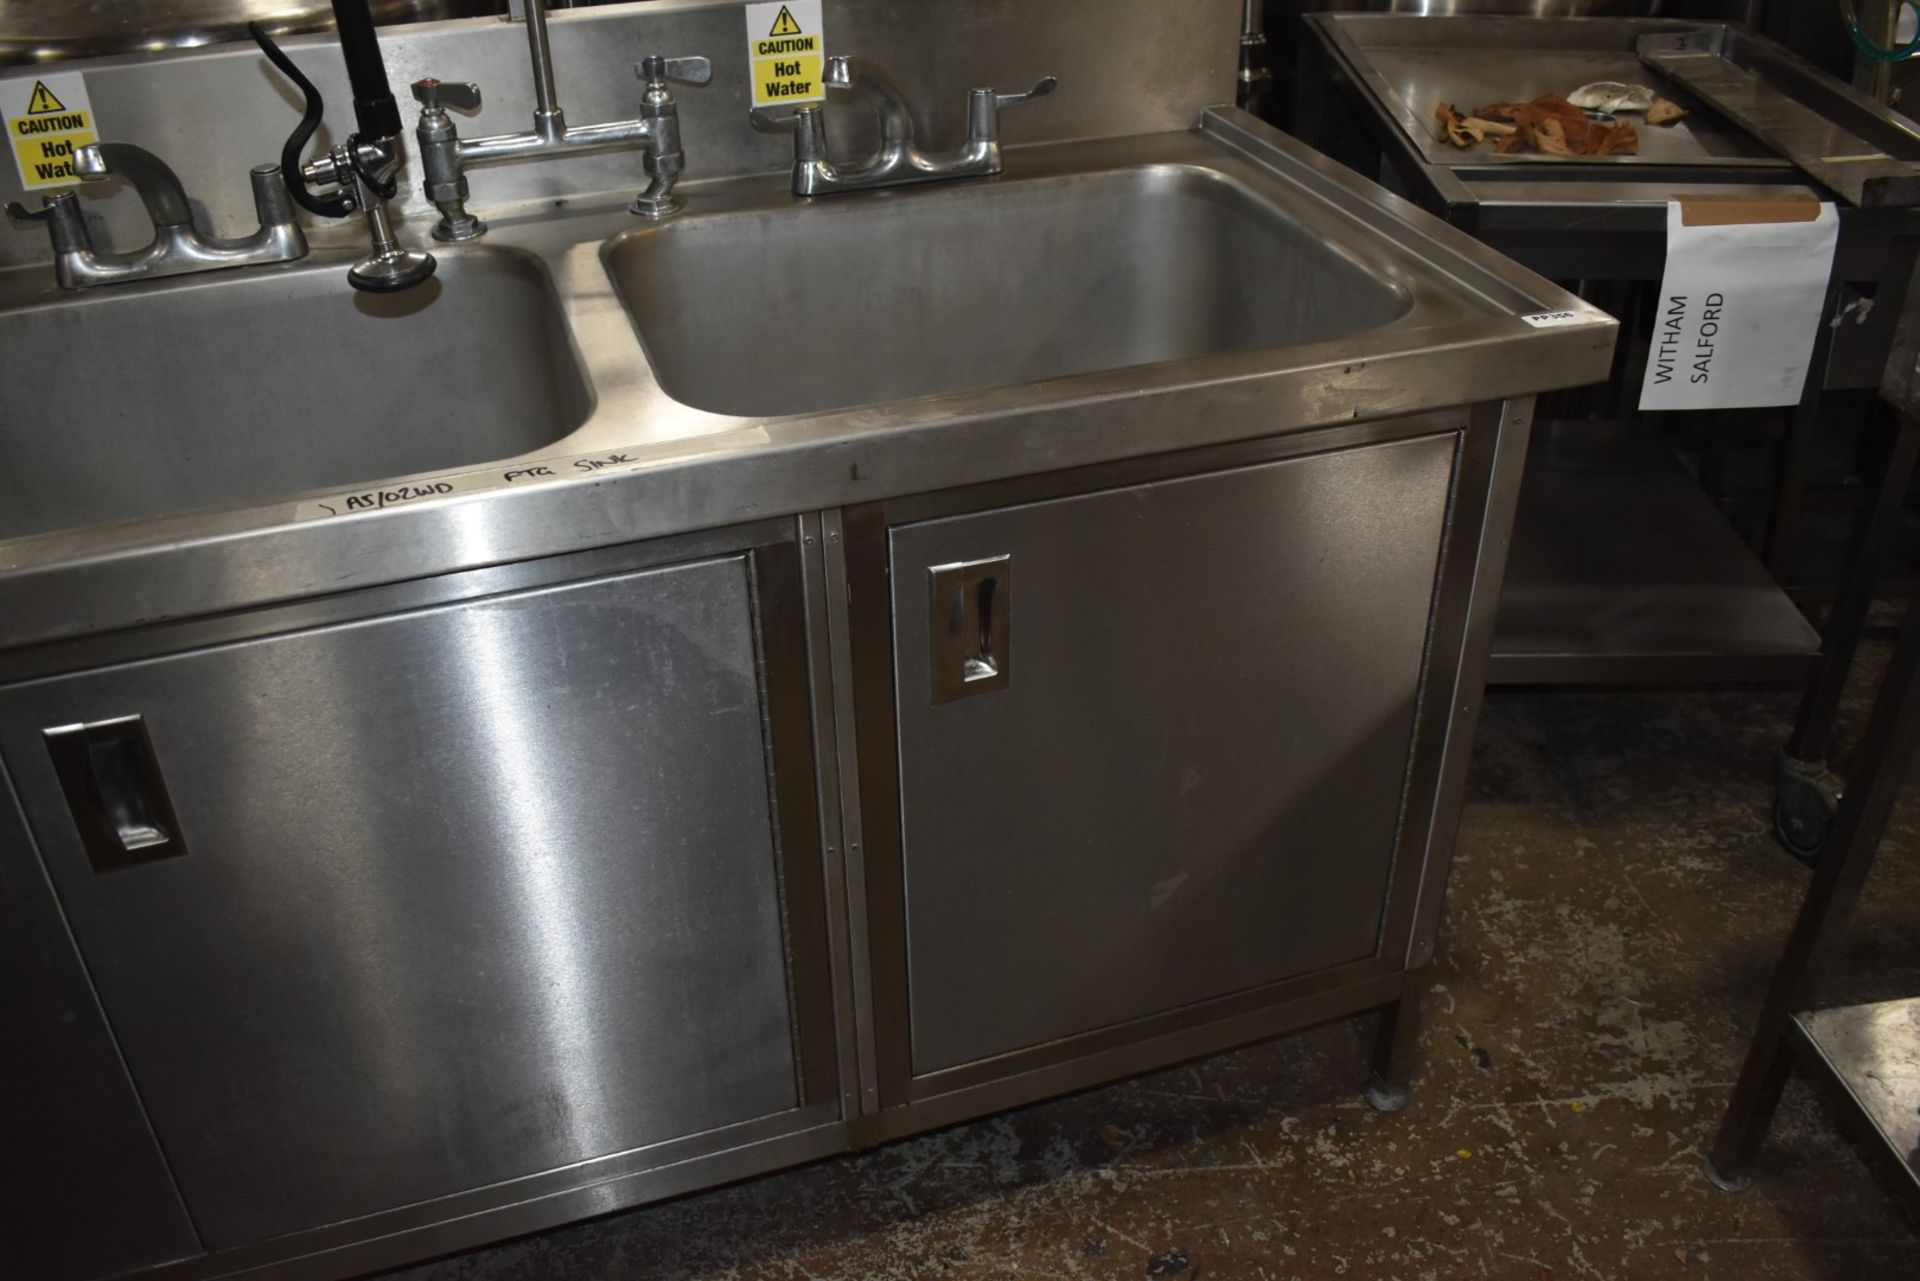 1 x Commercial Kitchen Wash Station With Two Large Sink Bowls, Mixer Taps, Spray Wash Gun, - Image 8 of 15